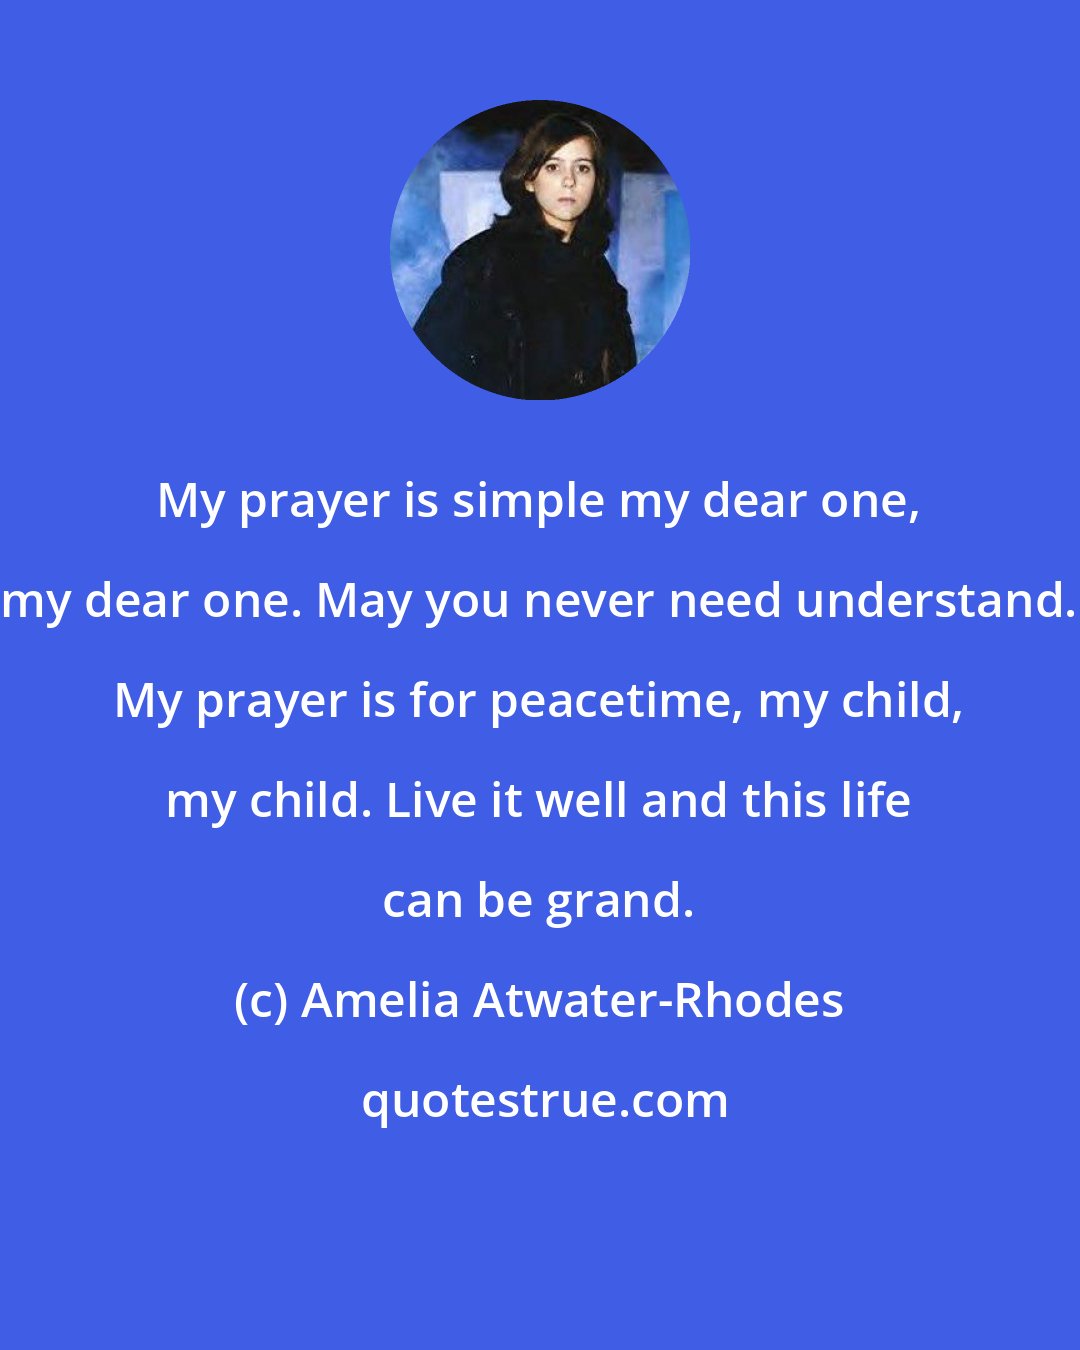 Amelia Atwater-Rhodes: My prayer is simple my dear one, my dear one. May you never need understand. My prayer is for peacetime, my child, my child. Live it well and this life can be grand.